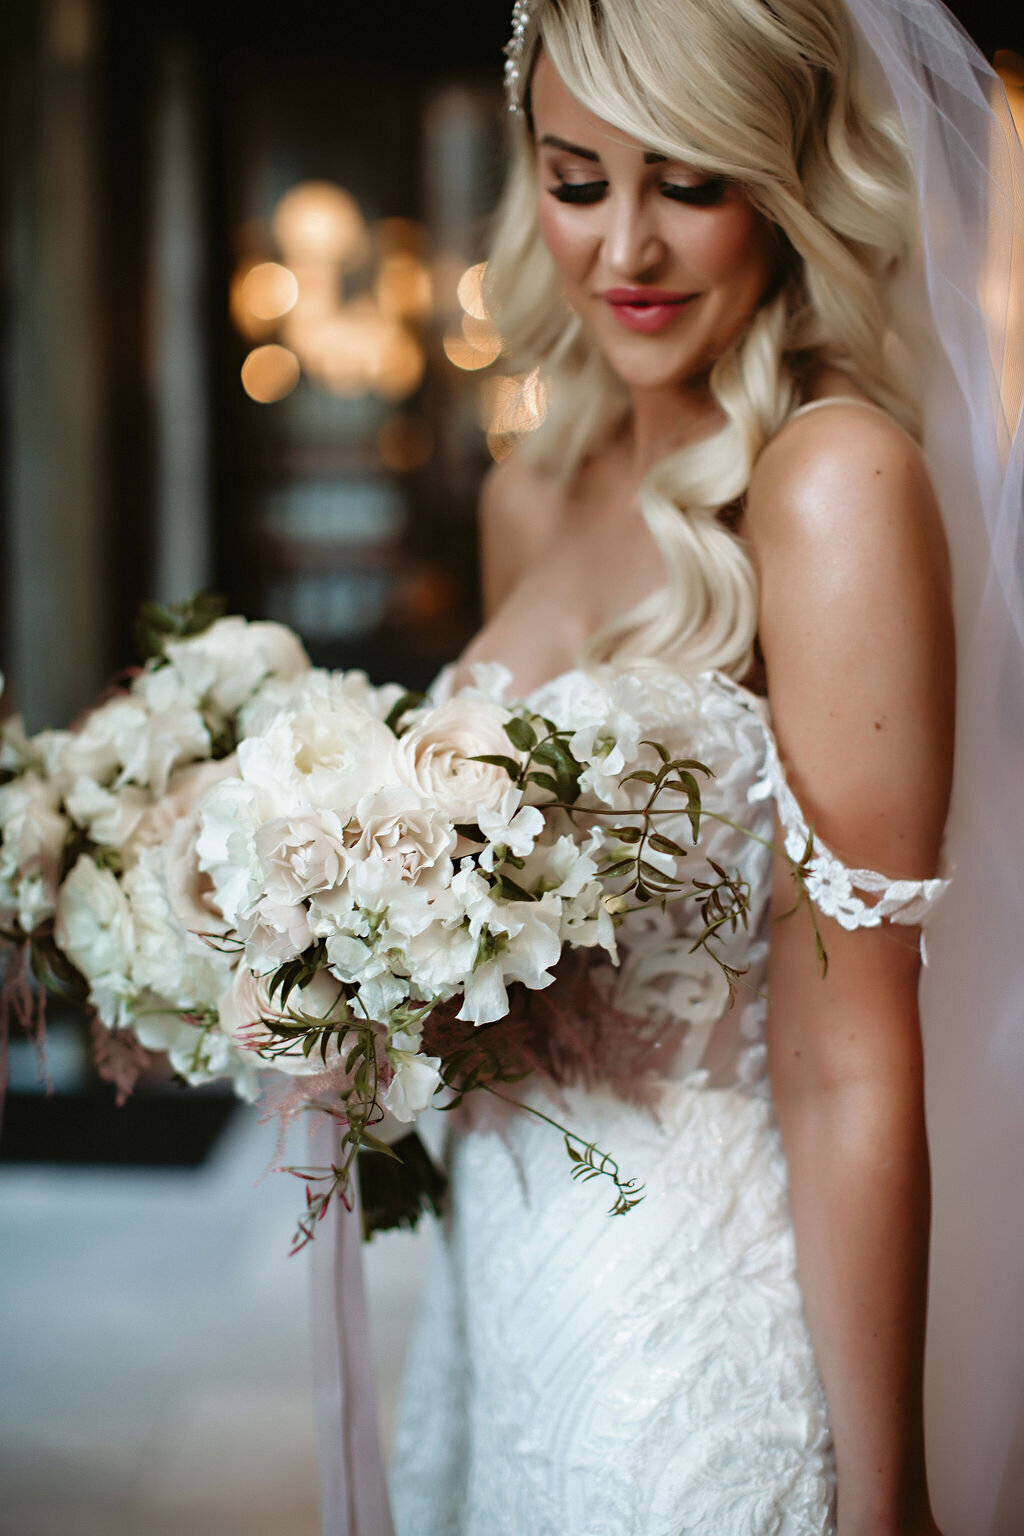 Bride posing with her bouquet in lace wedding gown.